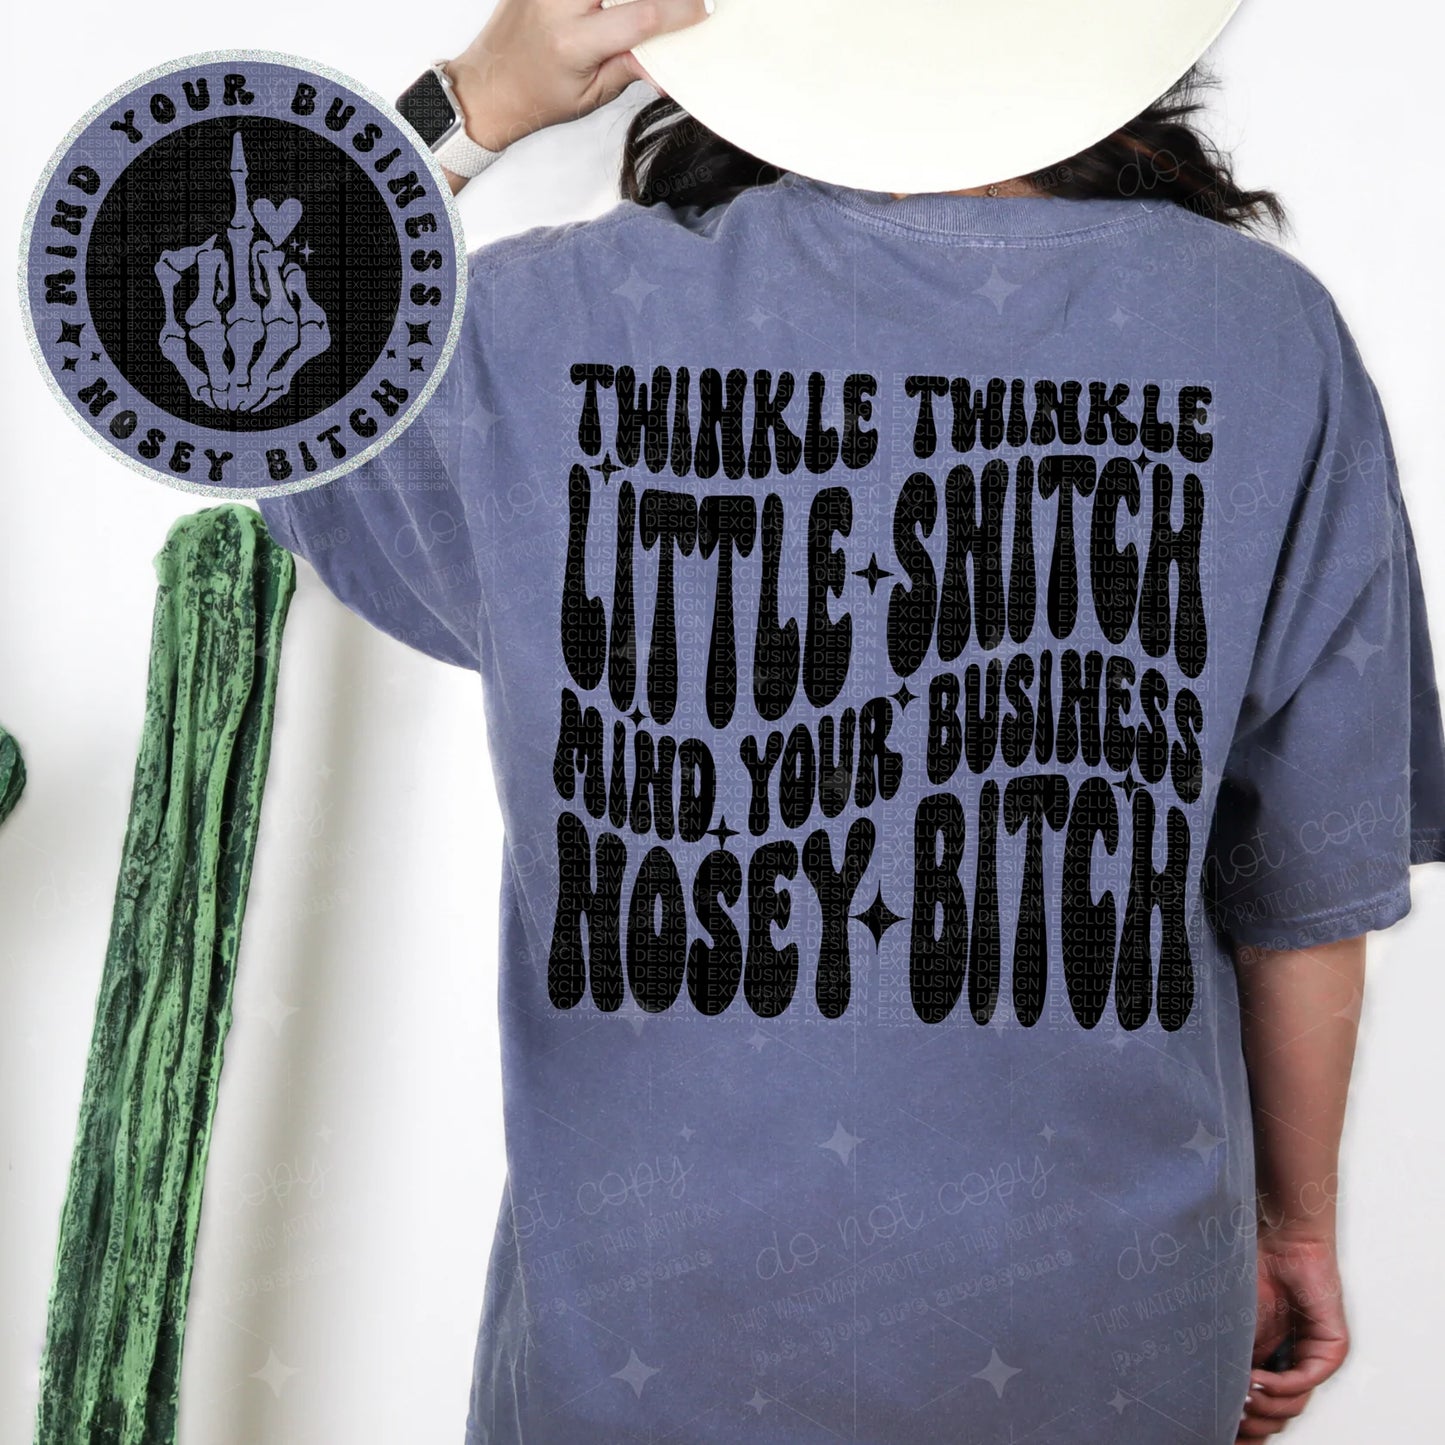 Twinkle twinkle little snitch *Ollie & Co. Exclusive*